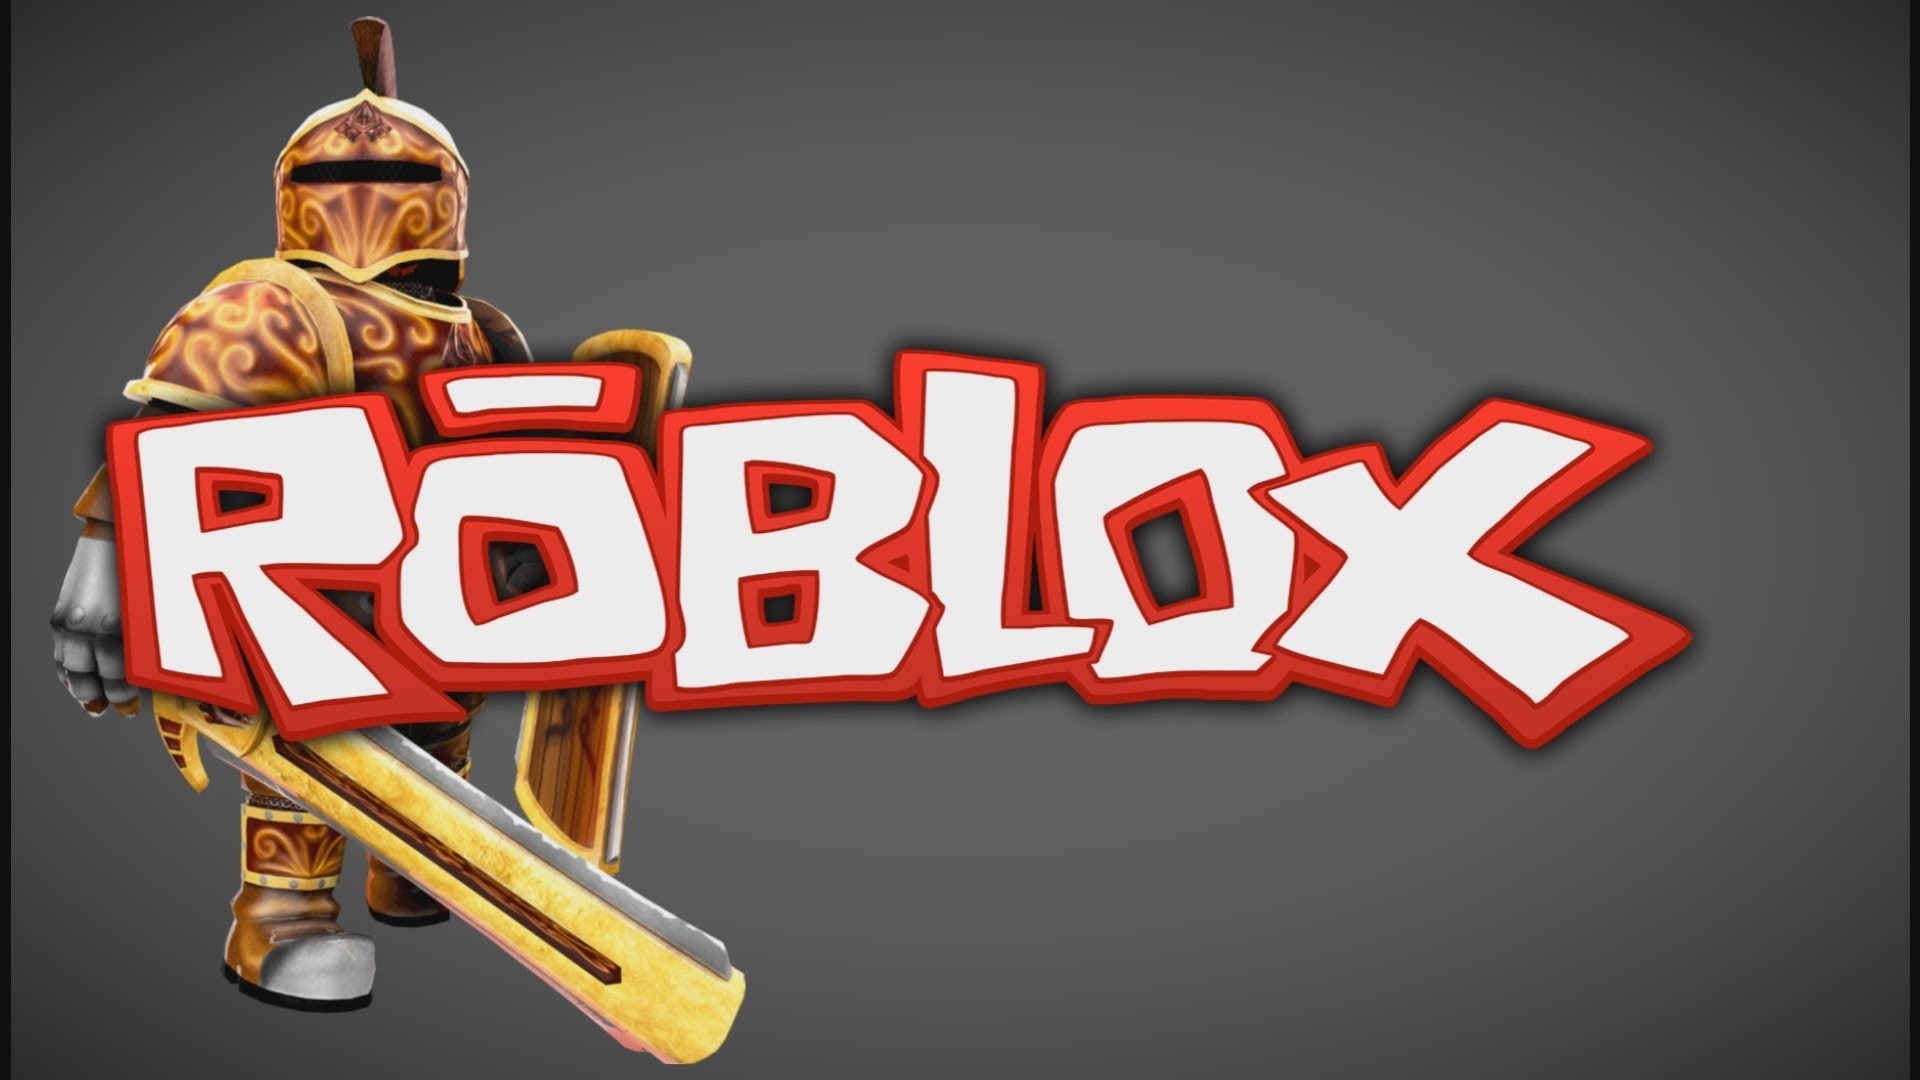 Cool Wallpapers Roblox Roblox Wallpapers Wallpaper Cave Download For Free On All Your Devices Computer Smartphone Or Tablet Kumpulan Alamat Grapari Telkomsel Dan Alamat Bank - wallpaper cave roblox background girl